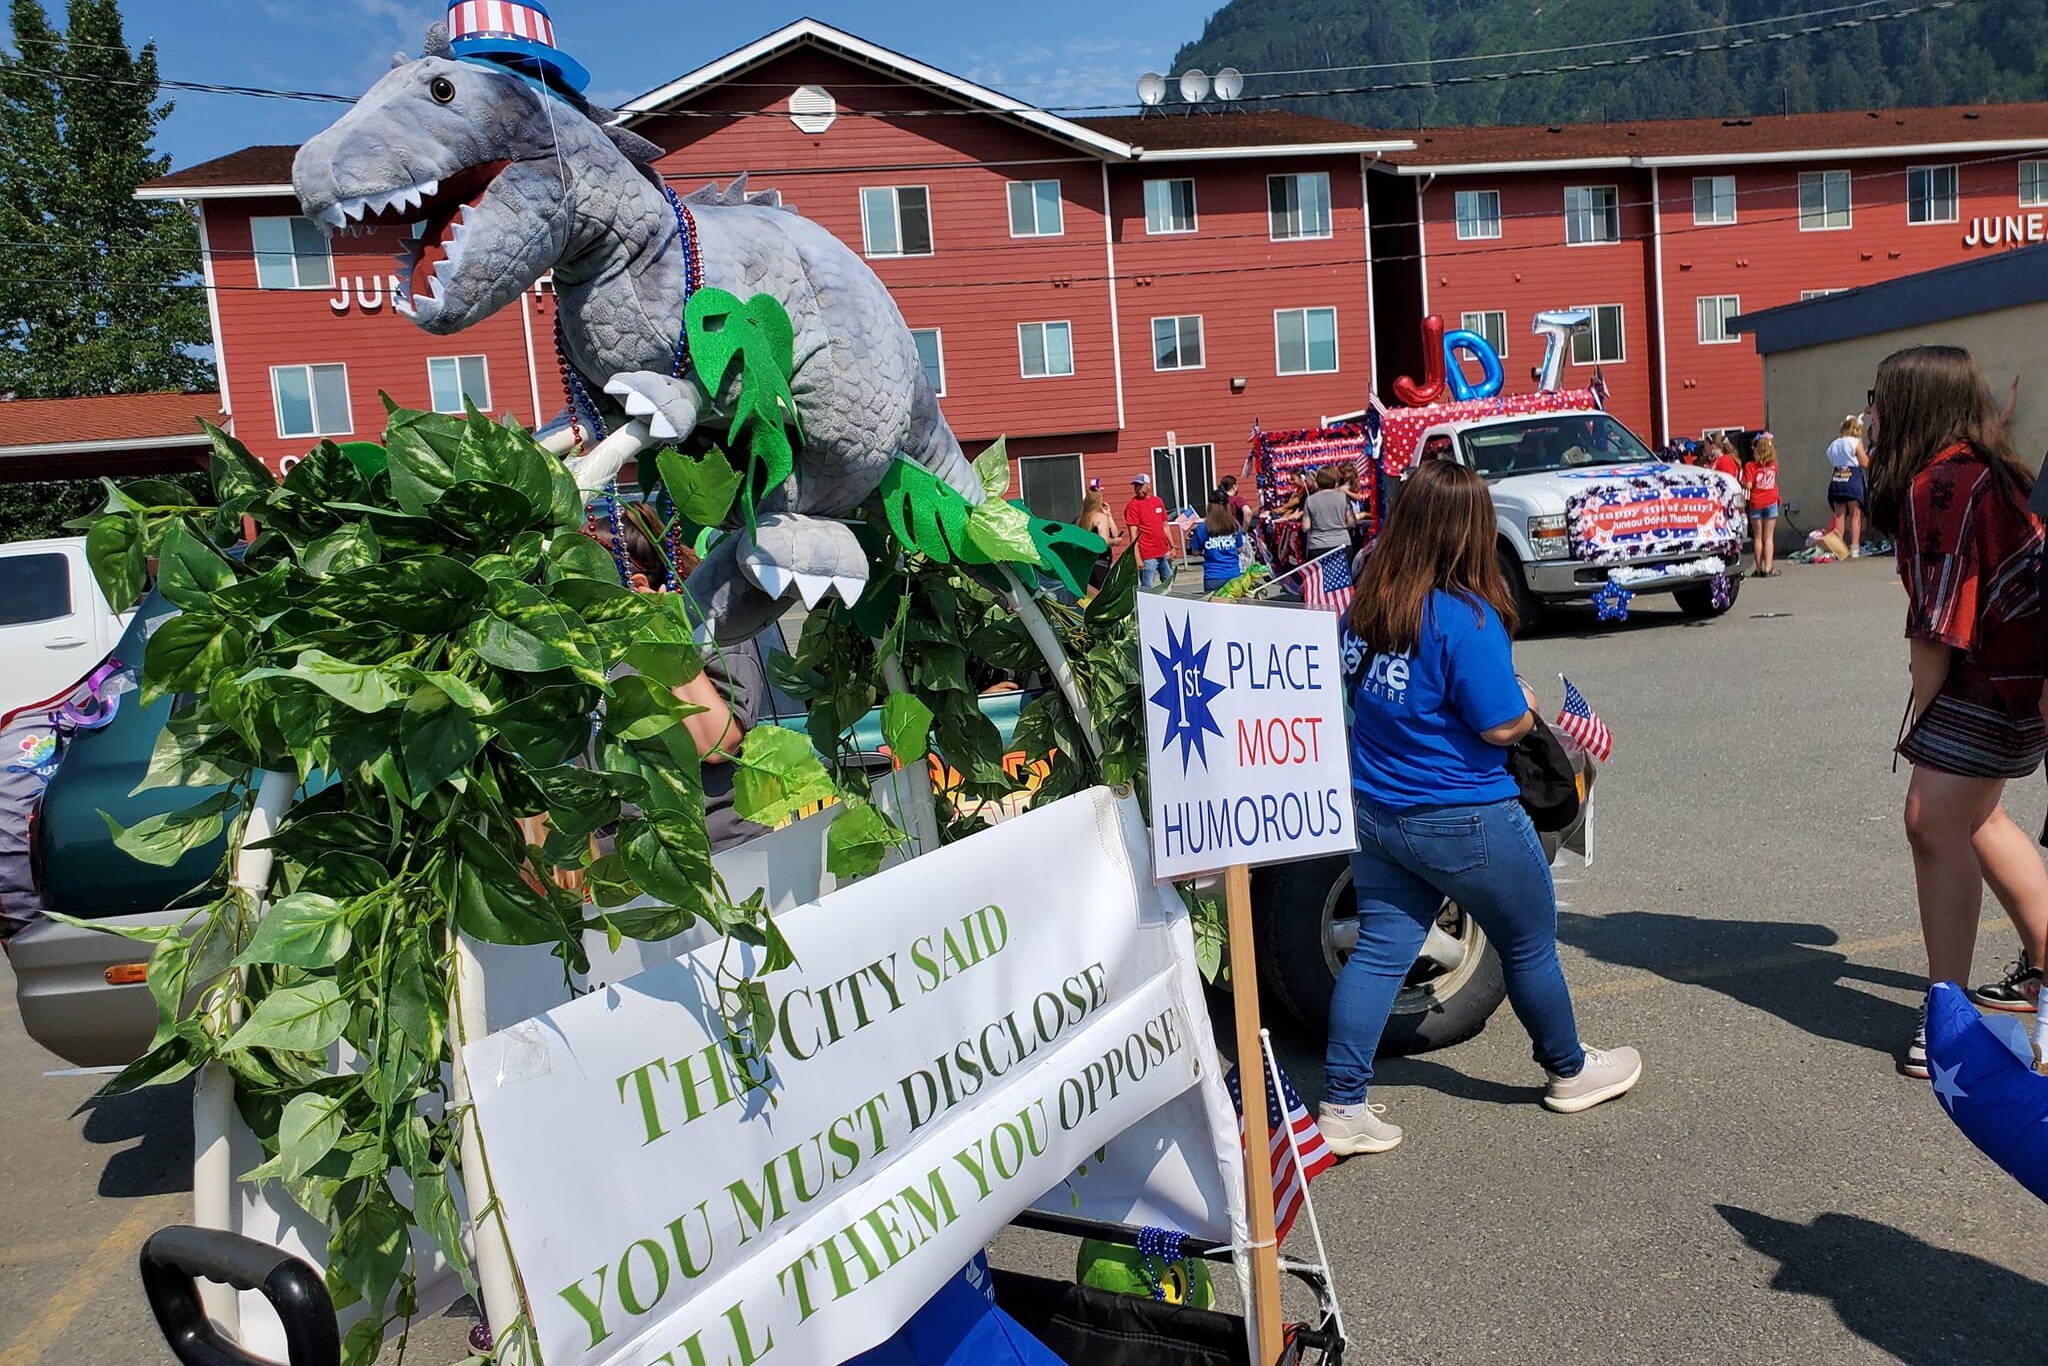 An Uncle Sam dinosaur adorns part of a float in Juneau’s July 4 by the group Protect Juneau Homeowner’s Privacy, which has successfully put a referendum on the Oct. 4 municipal election ballot to eliminate a requirement that property buyers publicly disclose purchase prices. (Courtesy of Protect Juneau Homeowners’ Privacy)